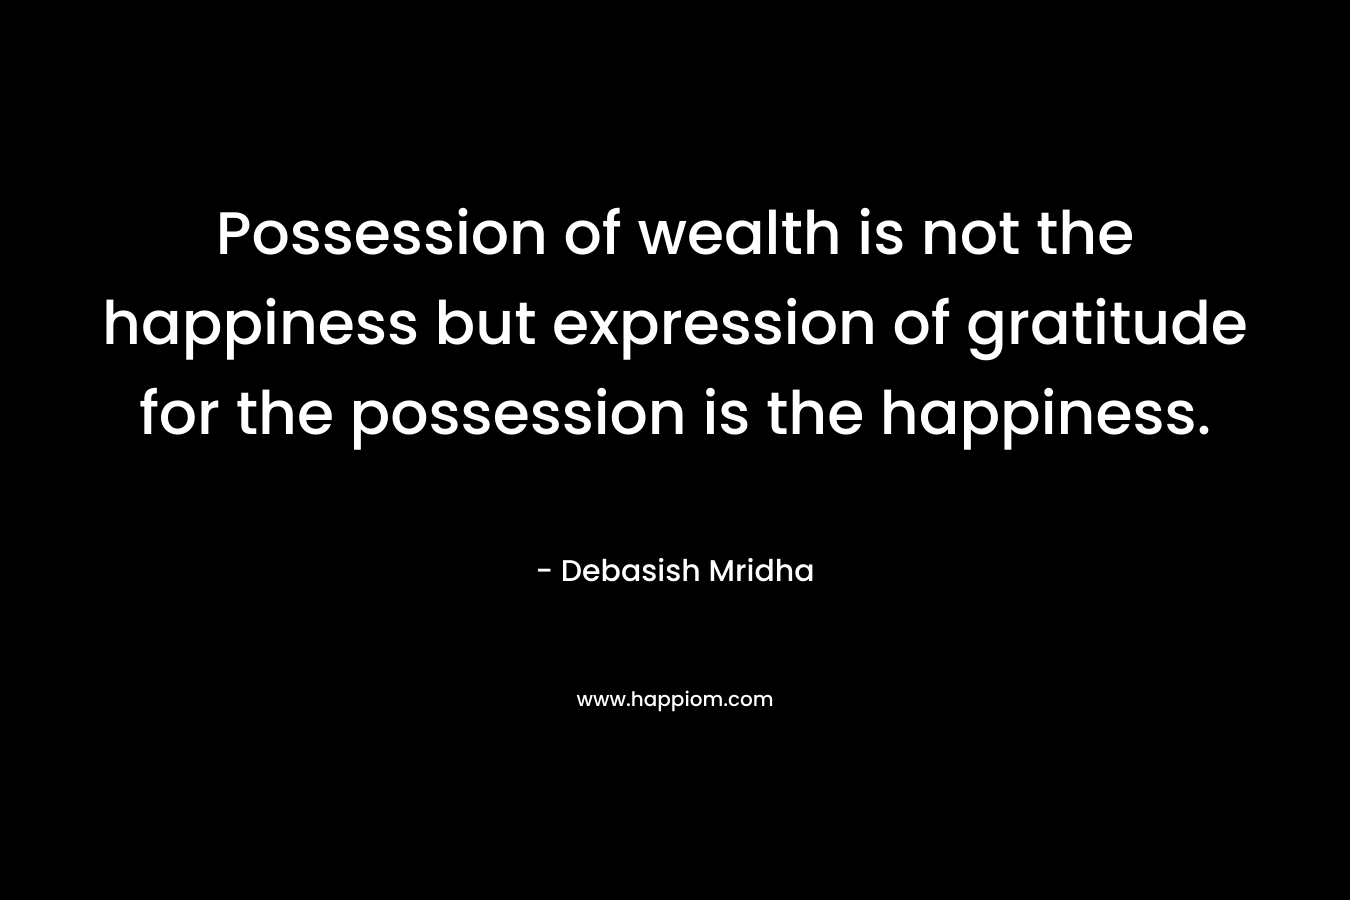 Possession of wealth is not the happiness but expression of gratitude for the possession is the happiness.